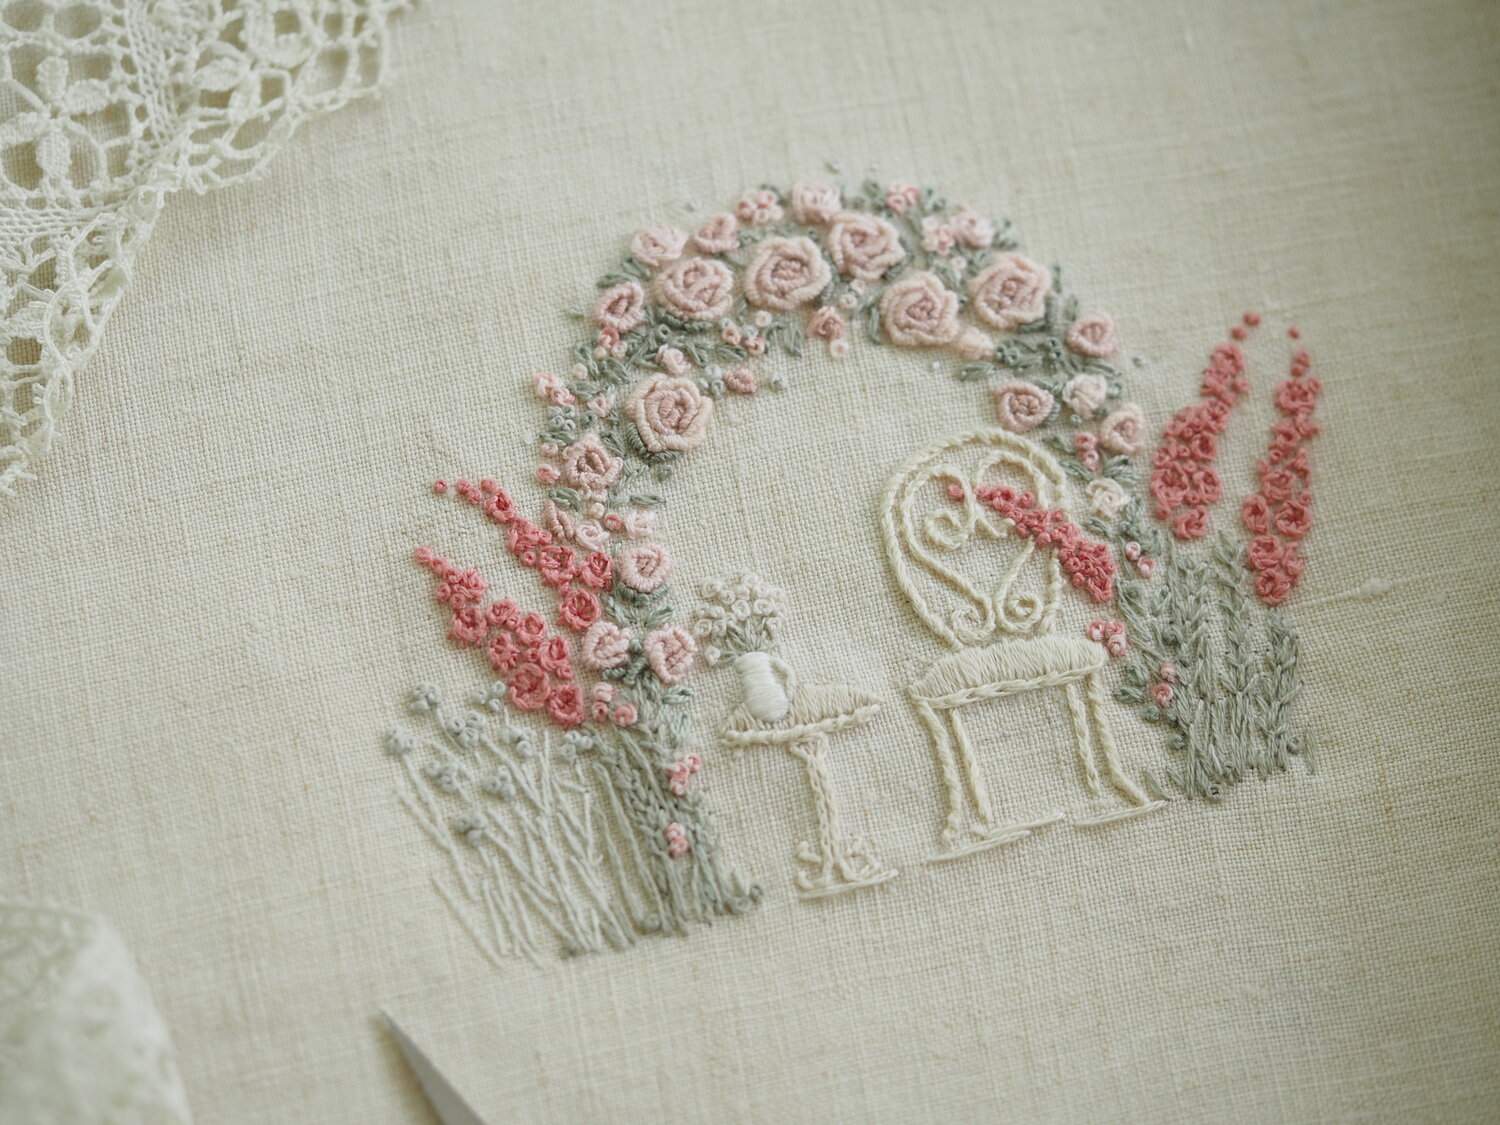 Get Your Hands on the best Stitch Book - Cahier de Broderie FRENCH